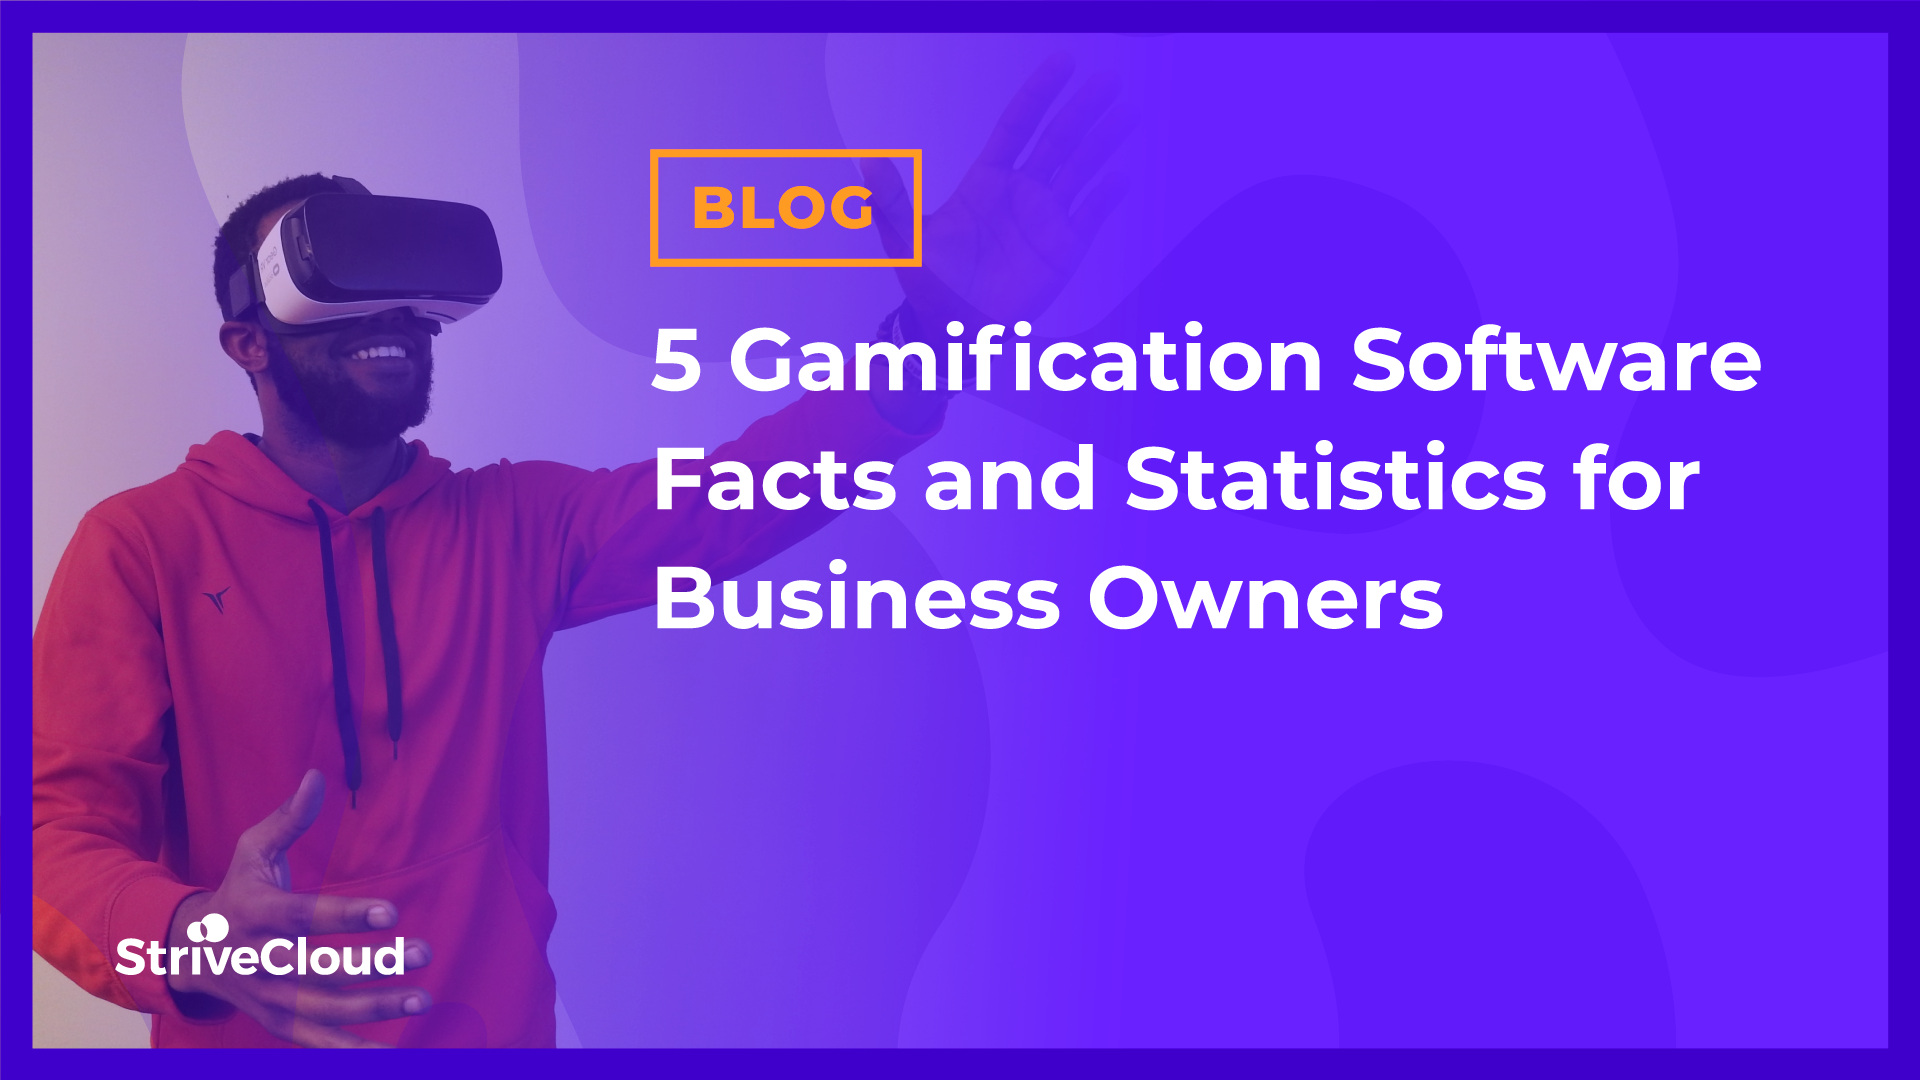 5 Gamification Software Facts and Statistics for Business Owners